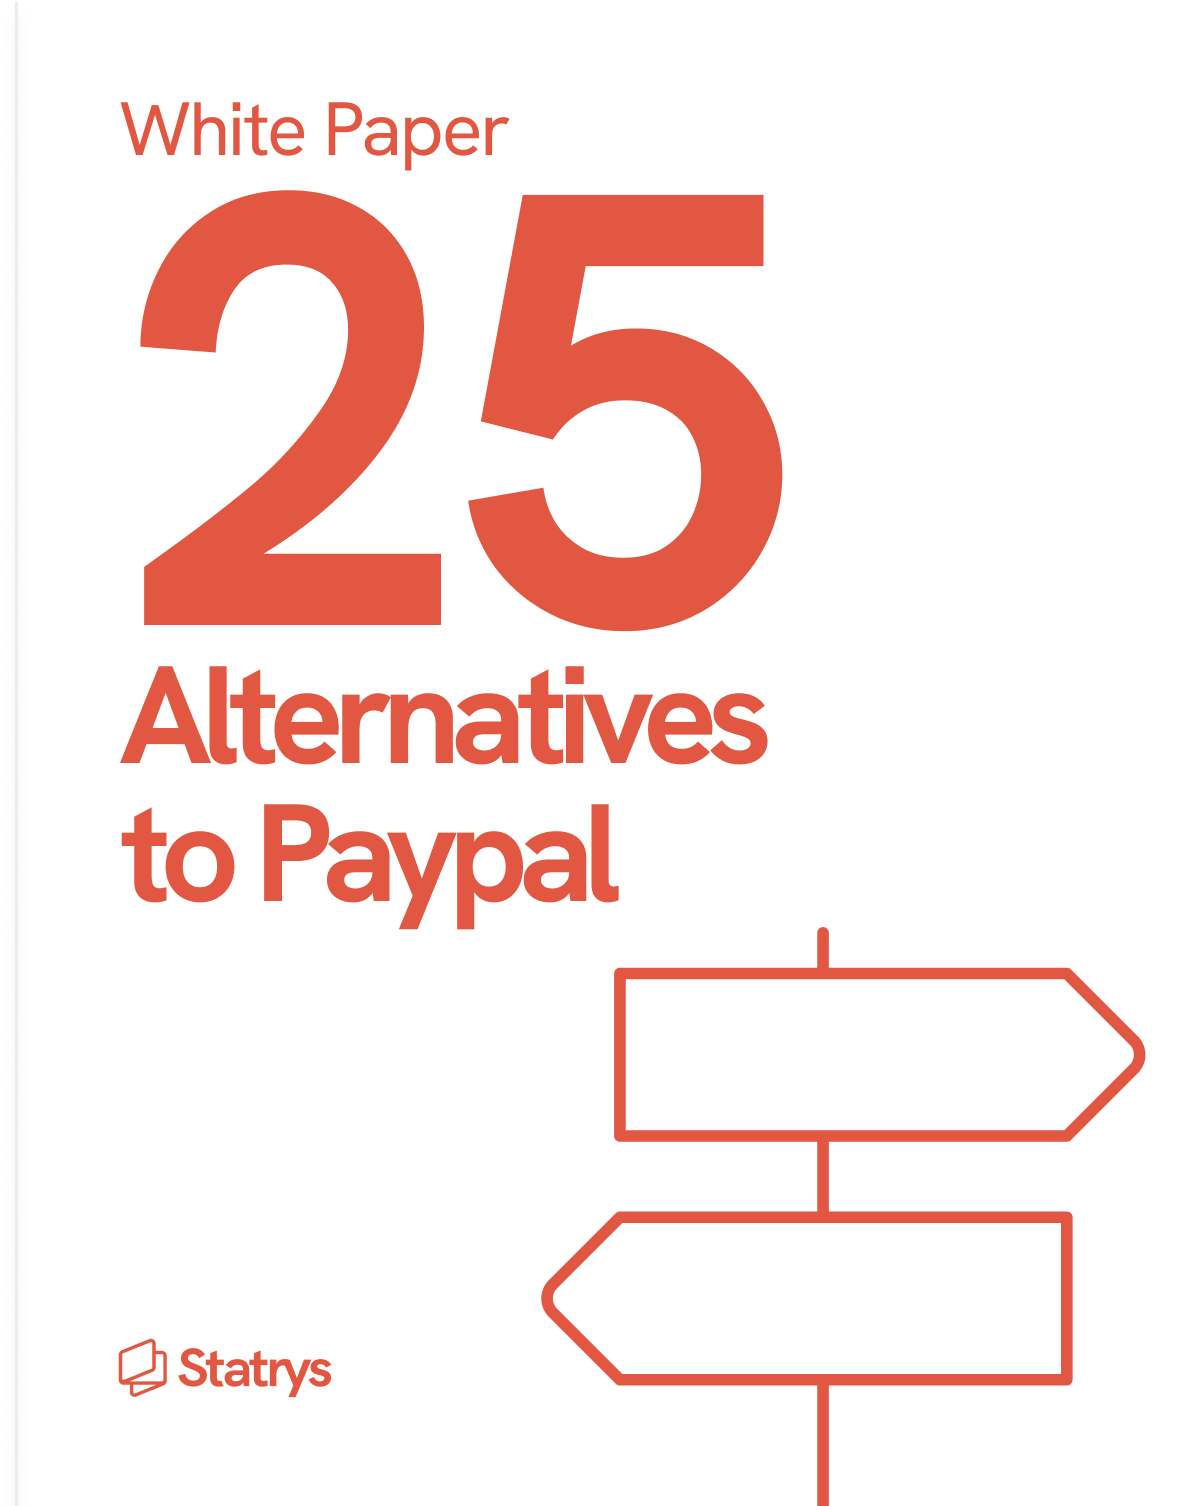 Alternatives to Paypal